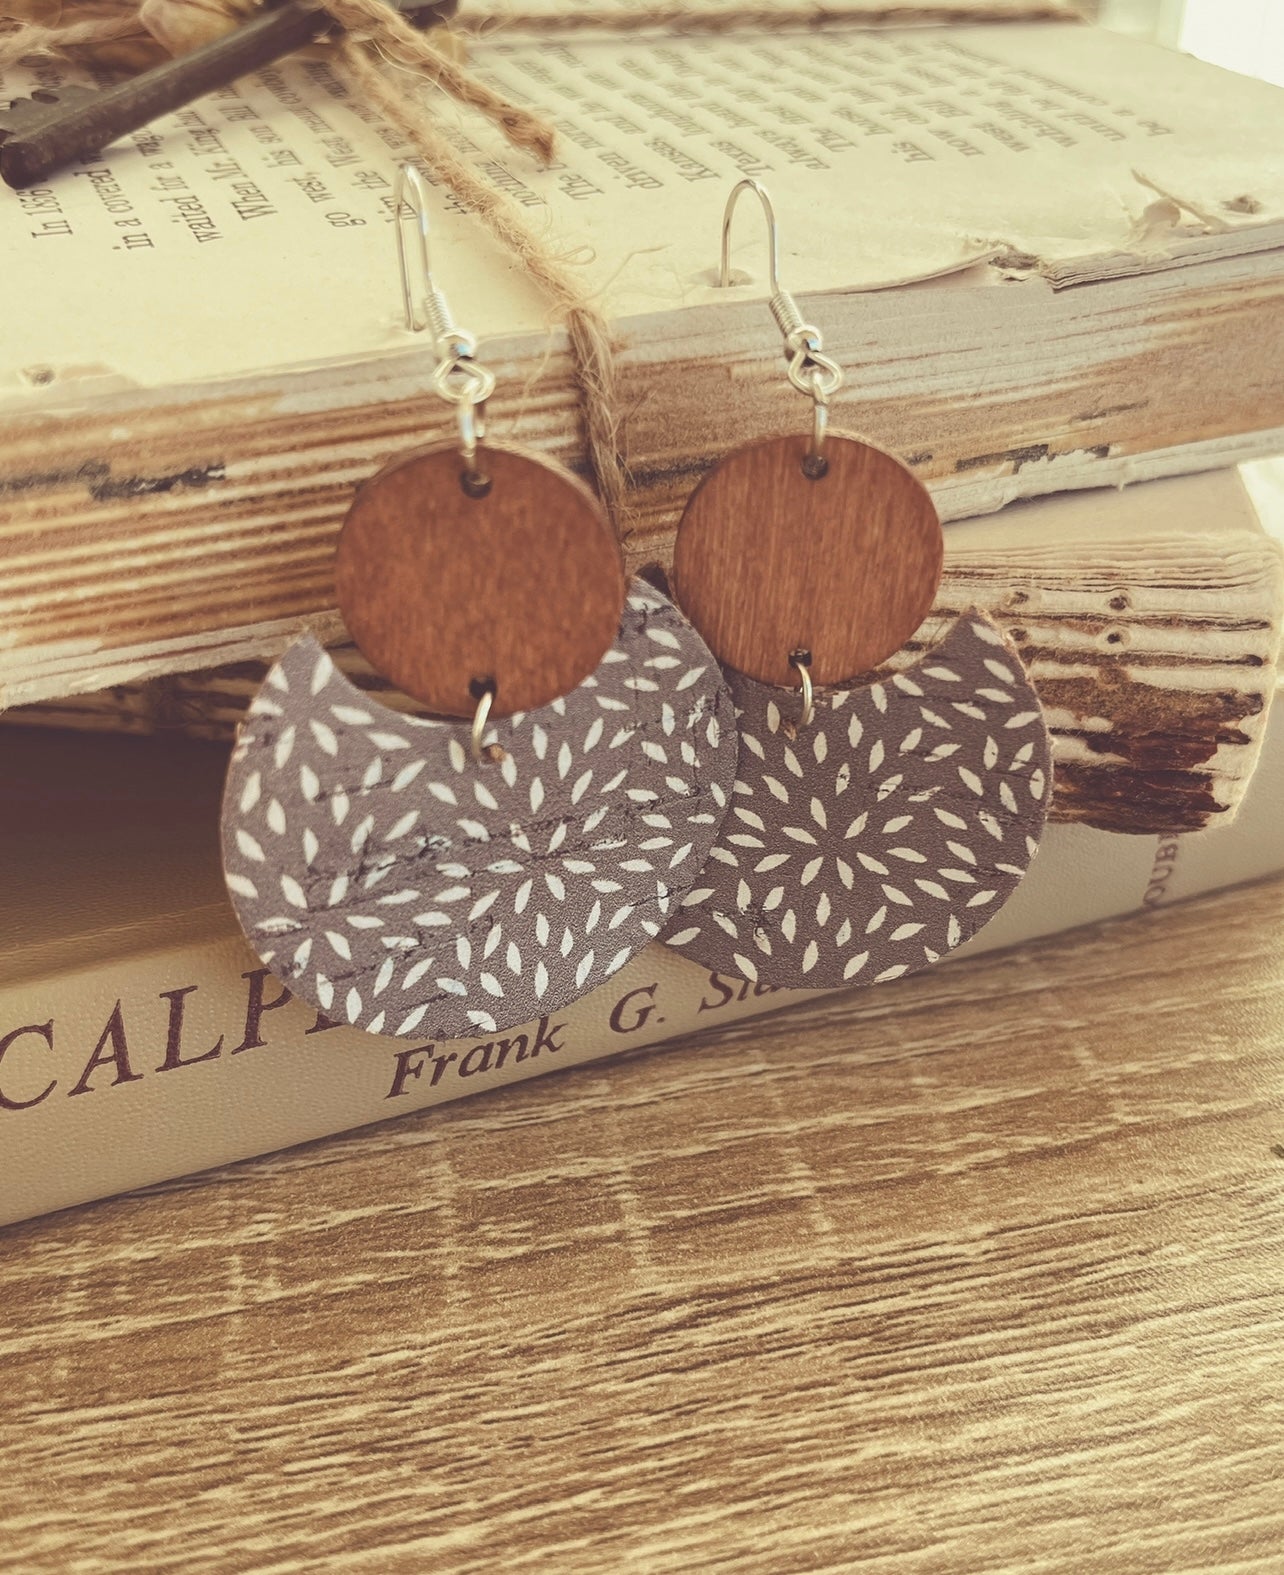 Beautiful Icy Blue/Gray Wood and Cork Earrings